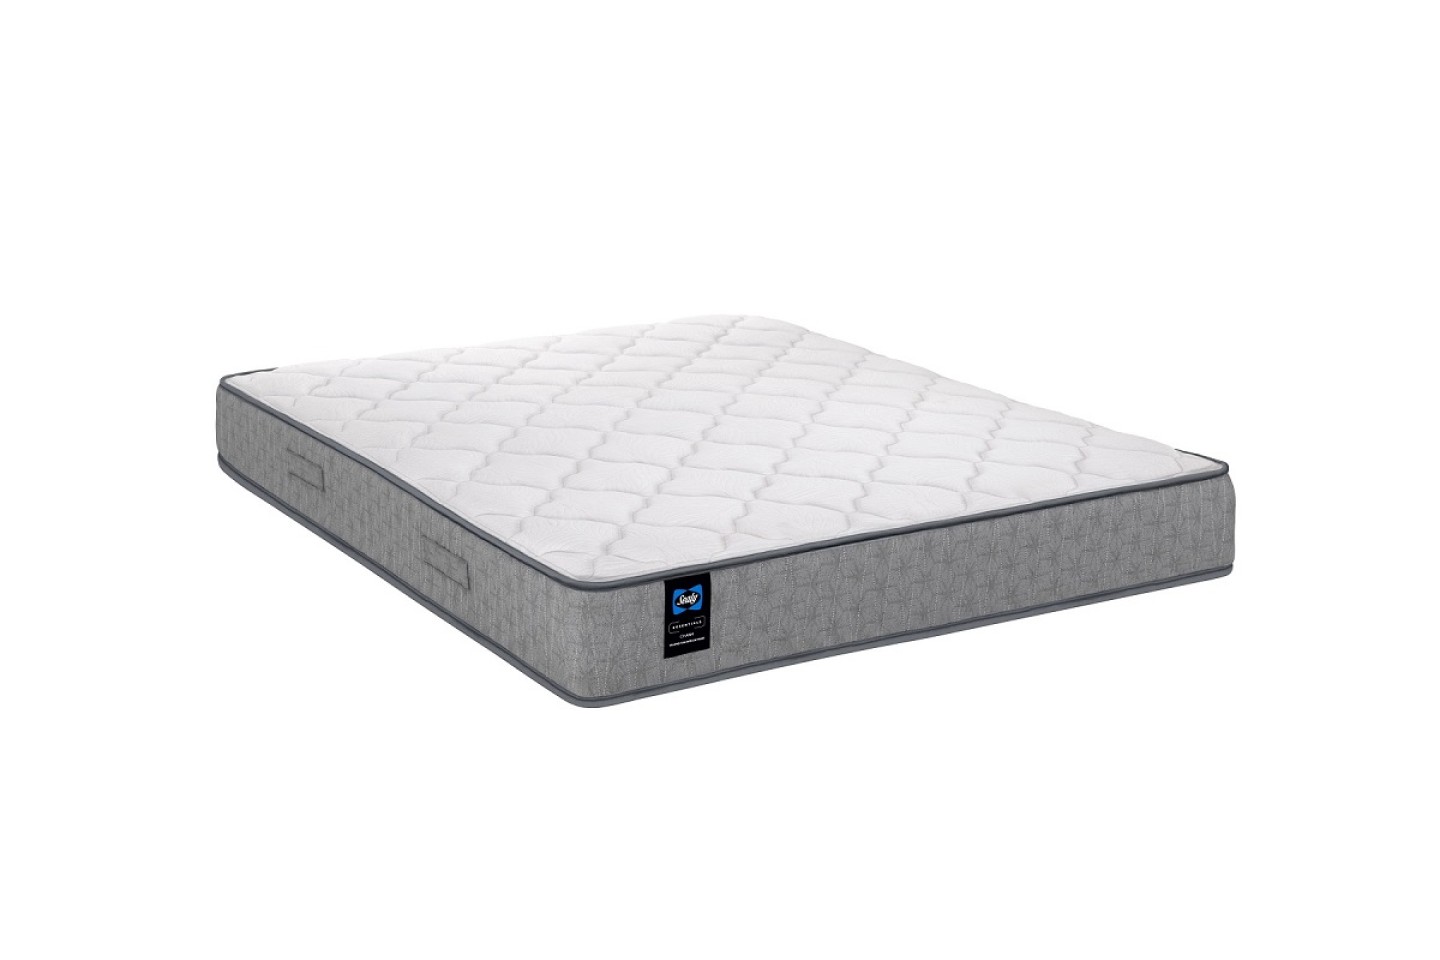 THE CHARM MATTRESS by Sealy